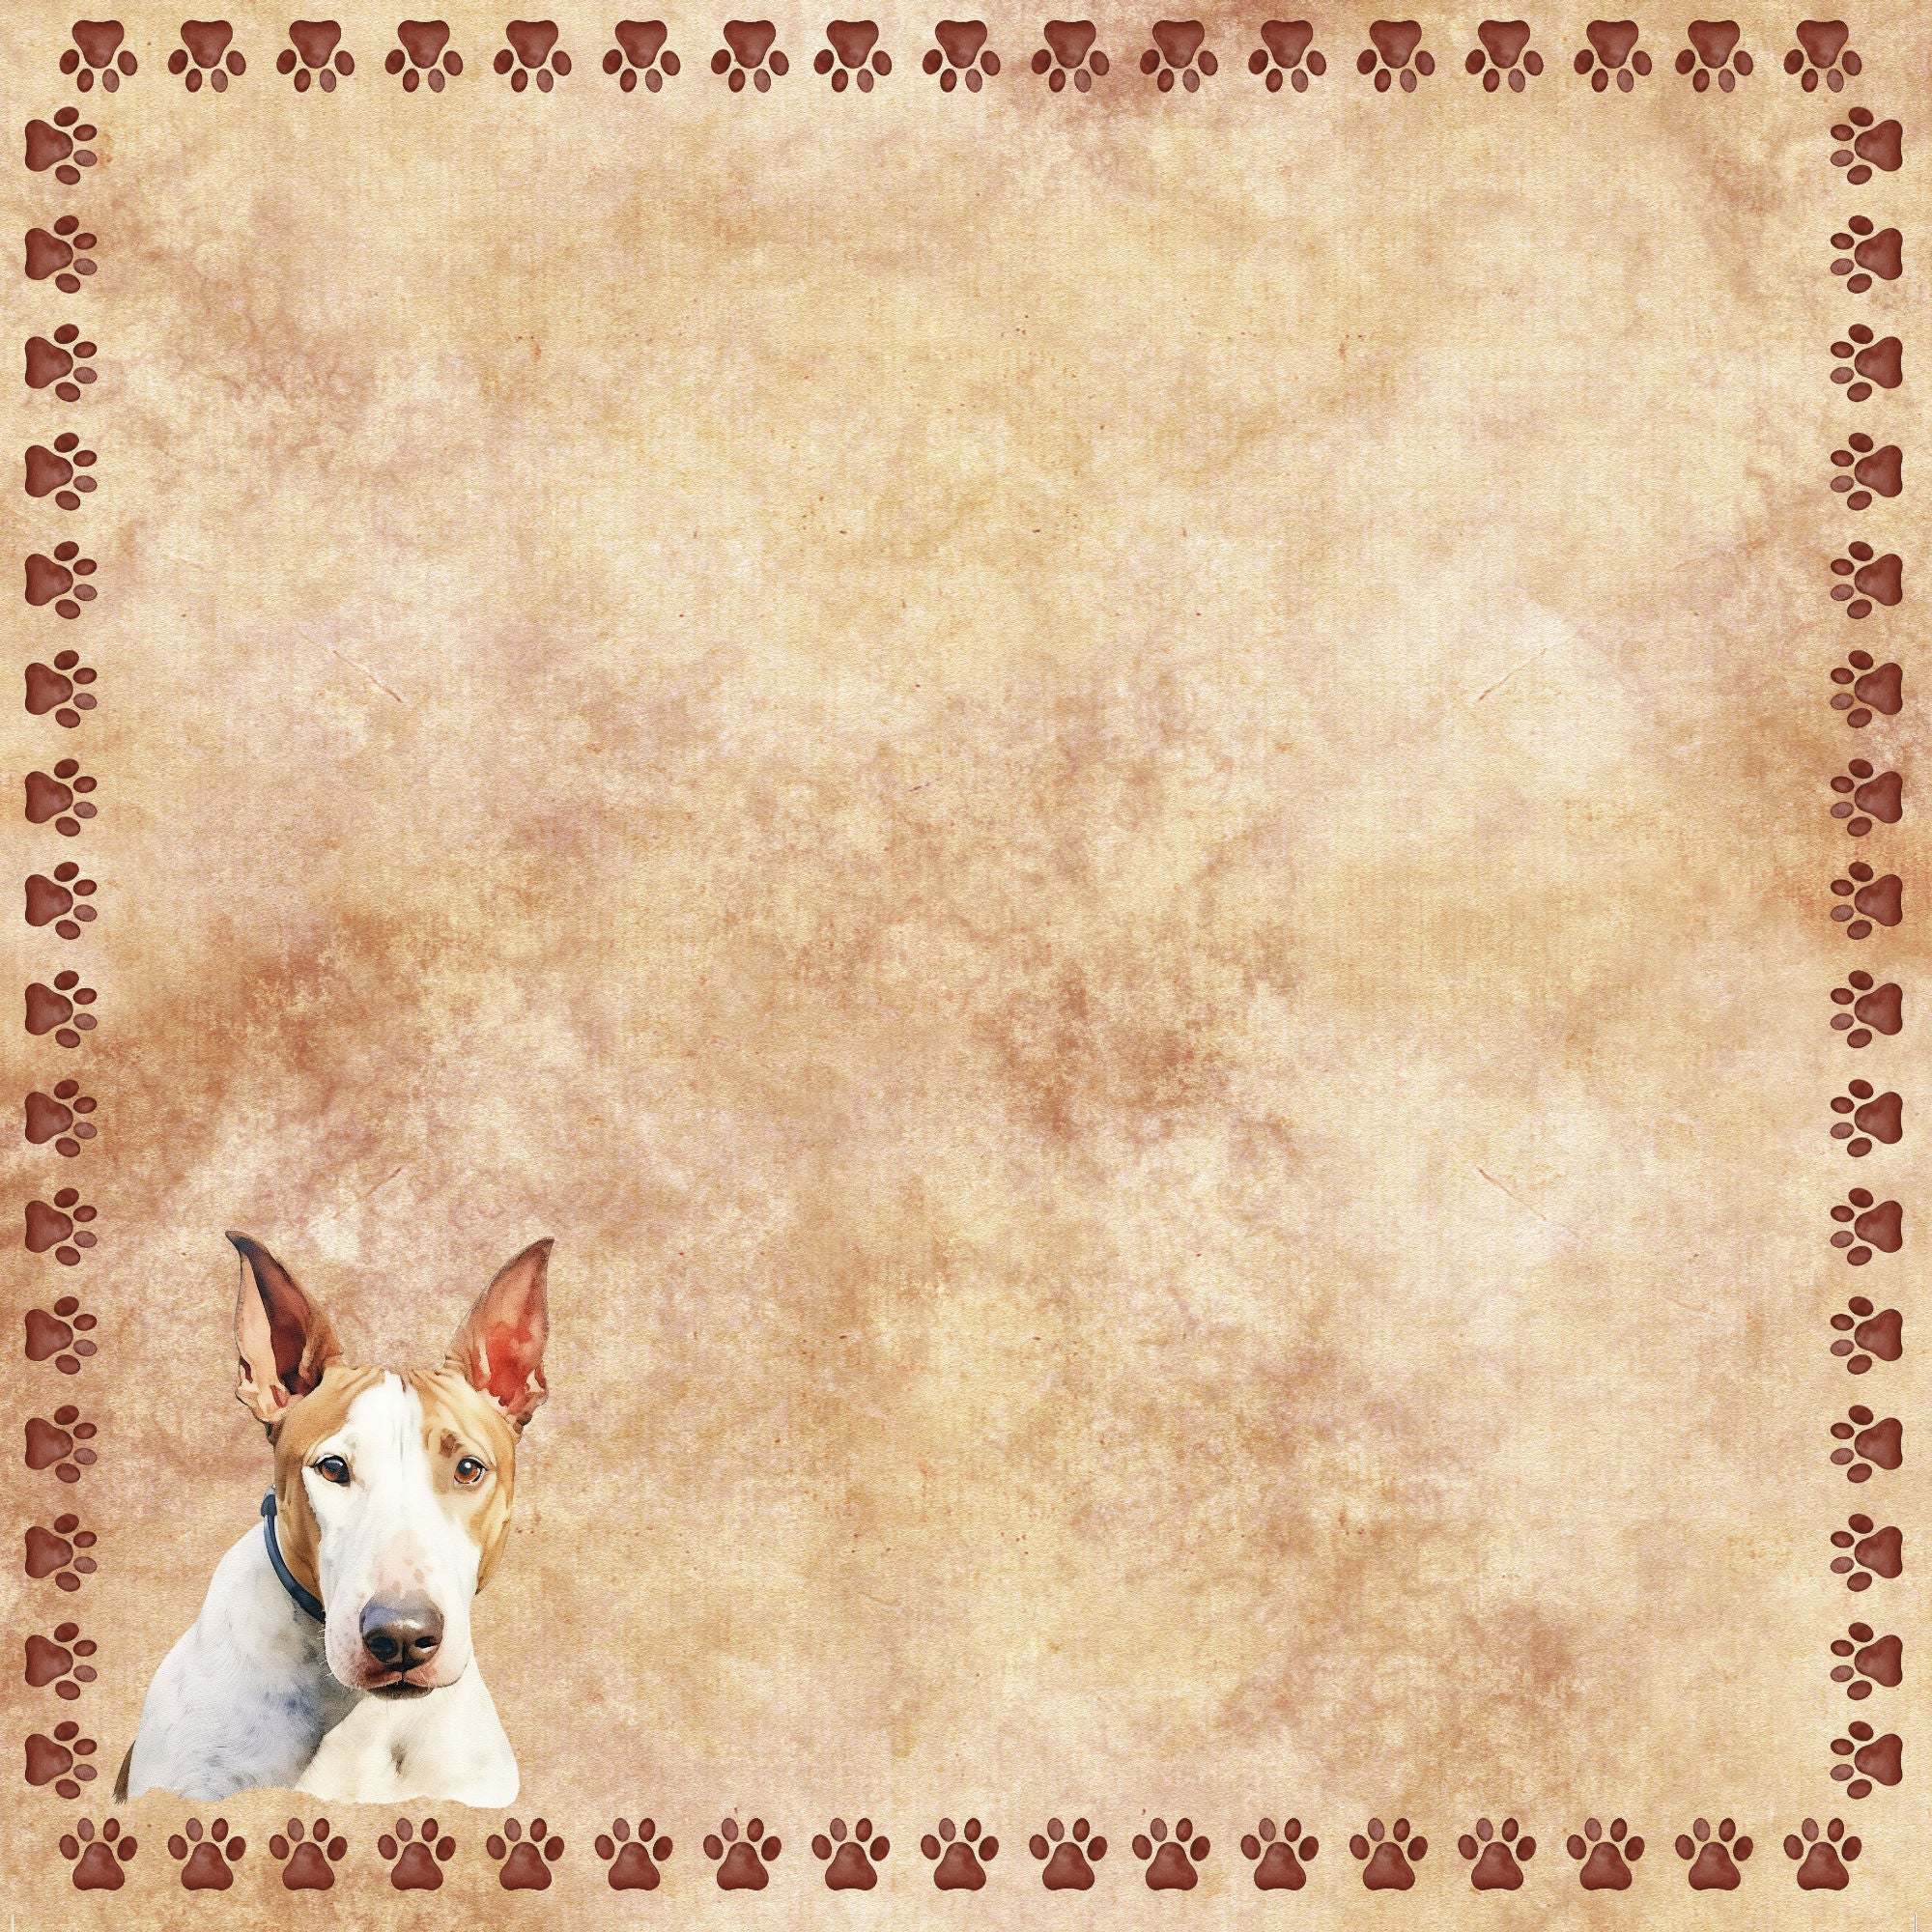 Dog Breeds Collection Bull Terrier 12 x 12 Double-Sided Scrapbook Paper by SSC Designs